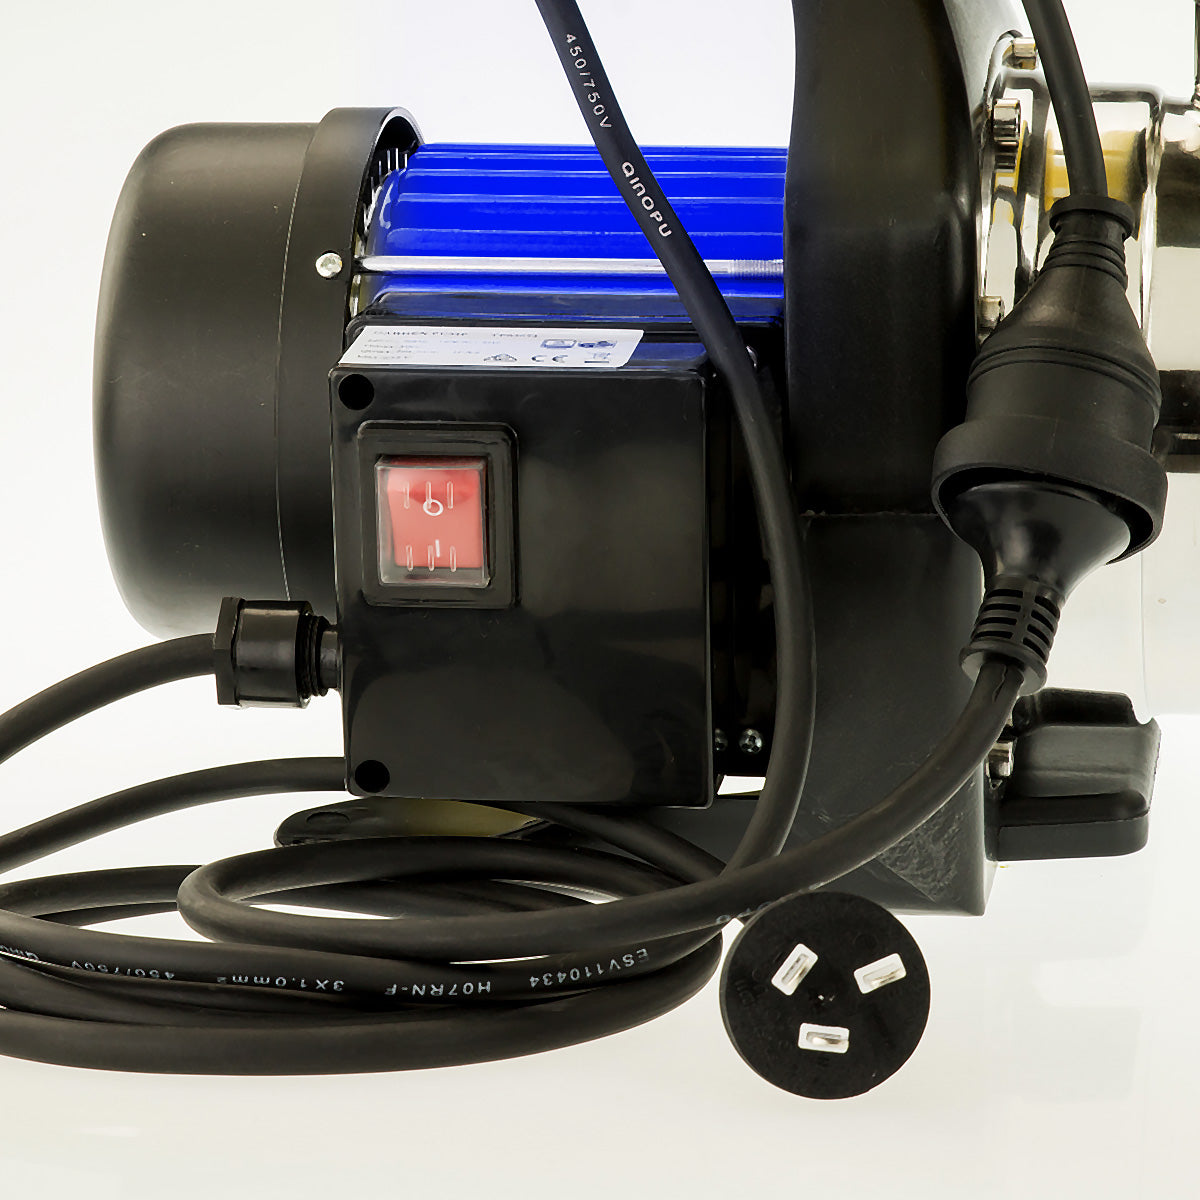 1400w Automatic stainless electric water pump - Blue